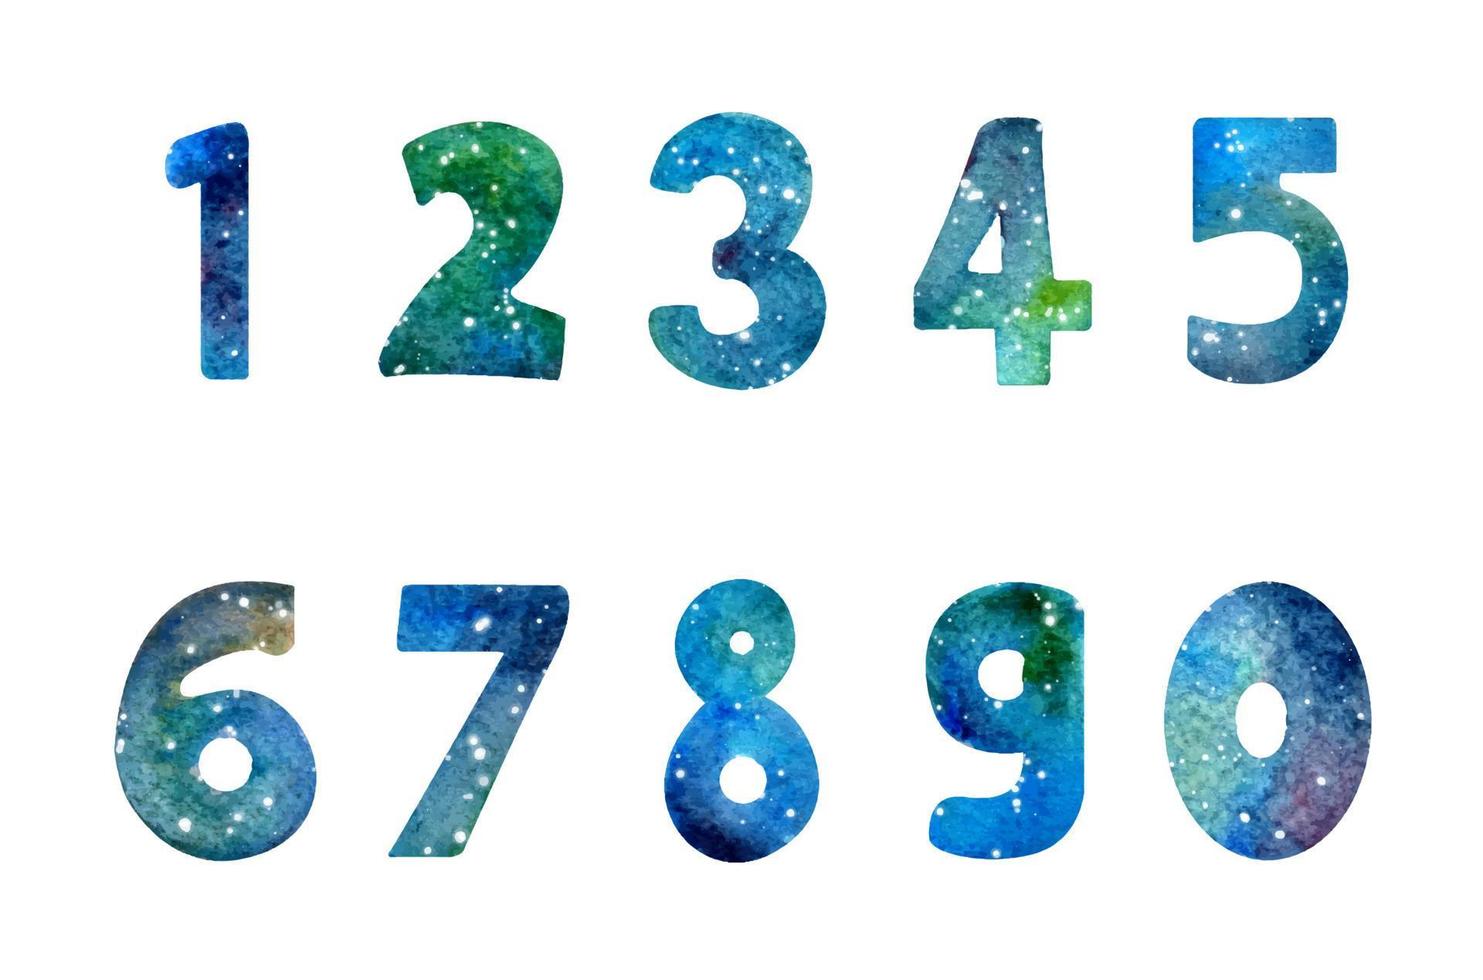 Watercolor galaxy or night sky with stars number from zero to nine. vector